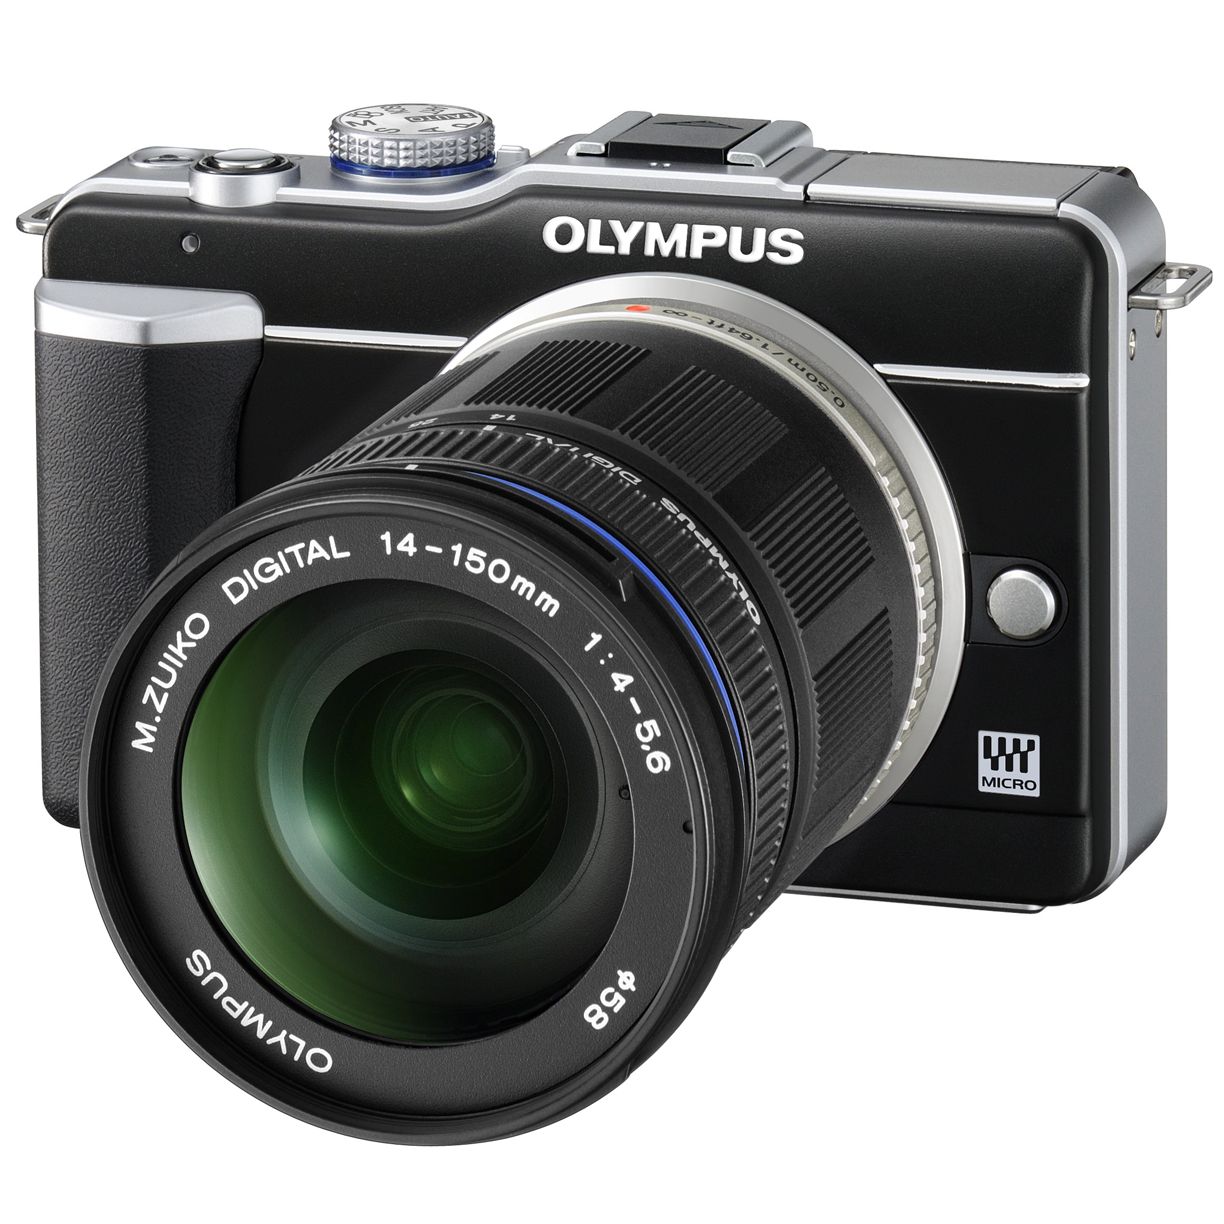 Olympus E-PL1 Micro Four Thirds Digital SLR Camera with 14-150mm Lens at John Lewis